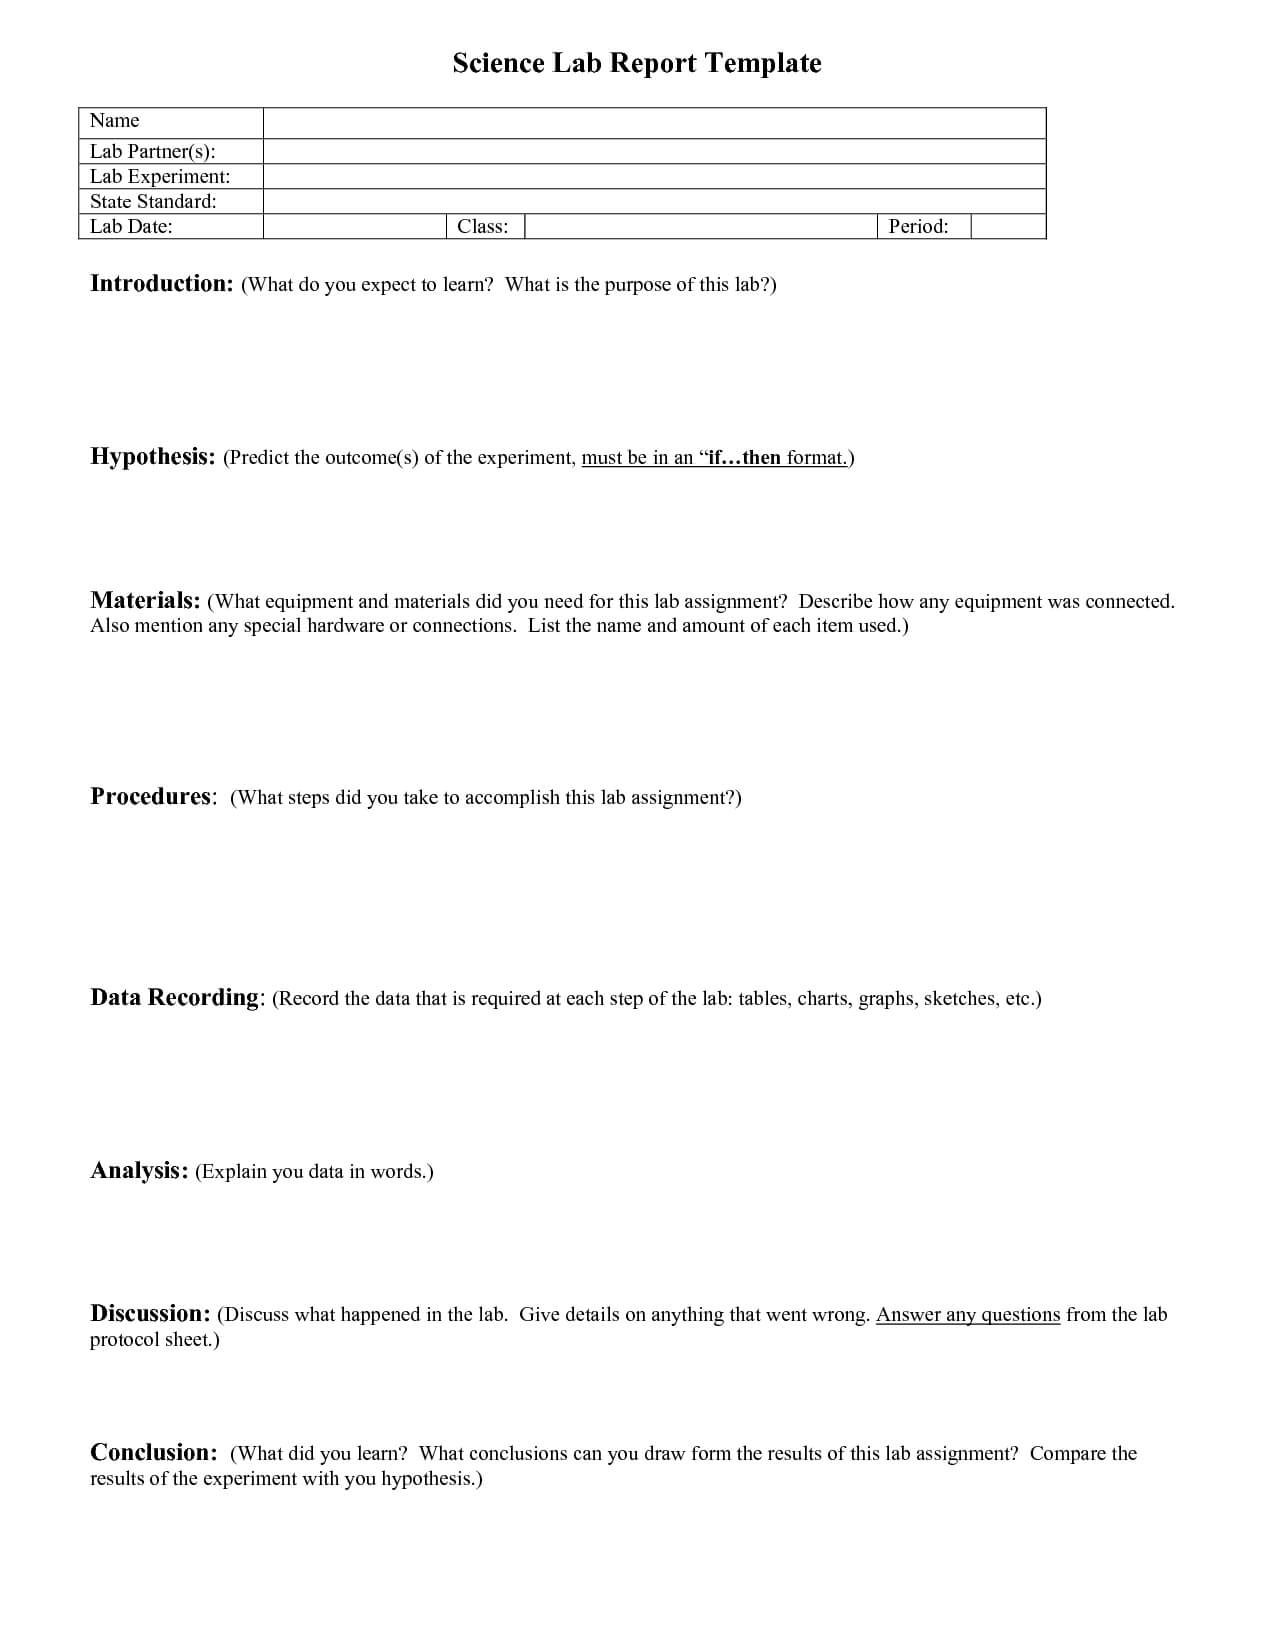 Lab Report Outline | Science Lab Report Template | School Pertaining To Science Lab Report Template